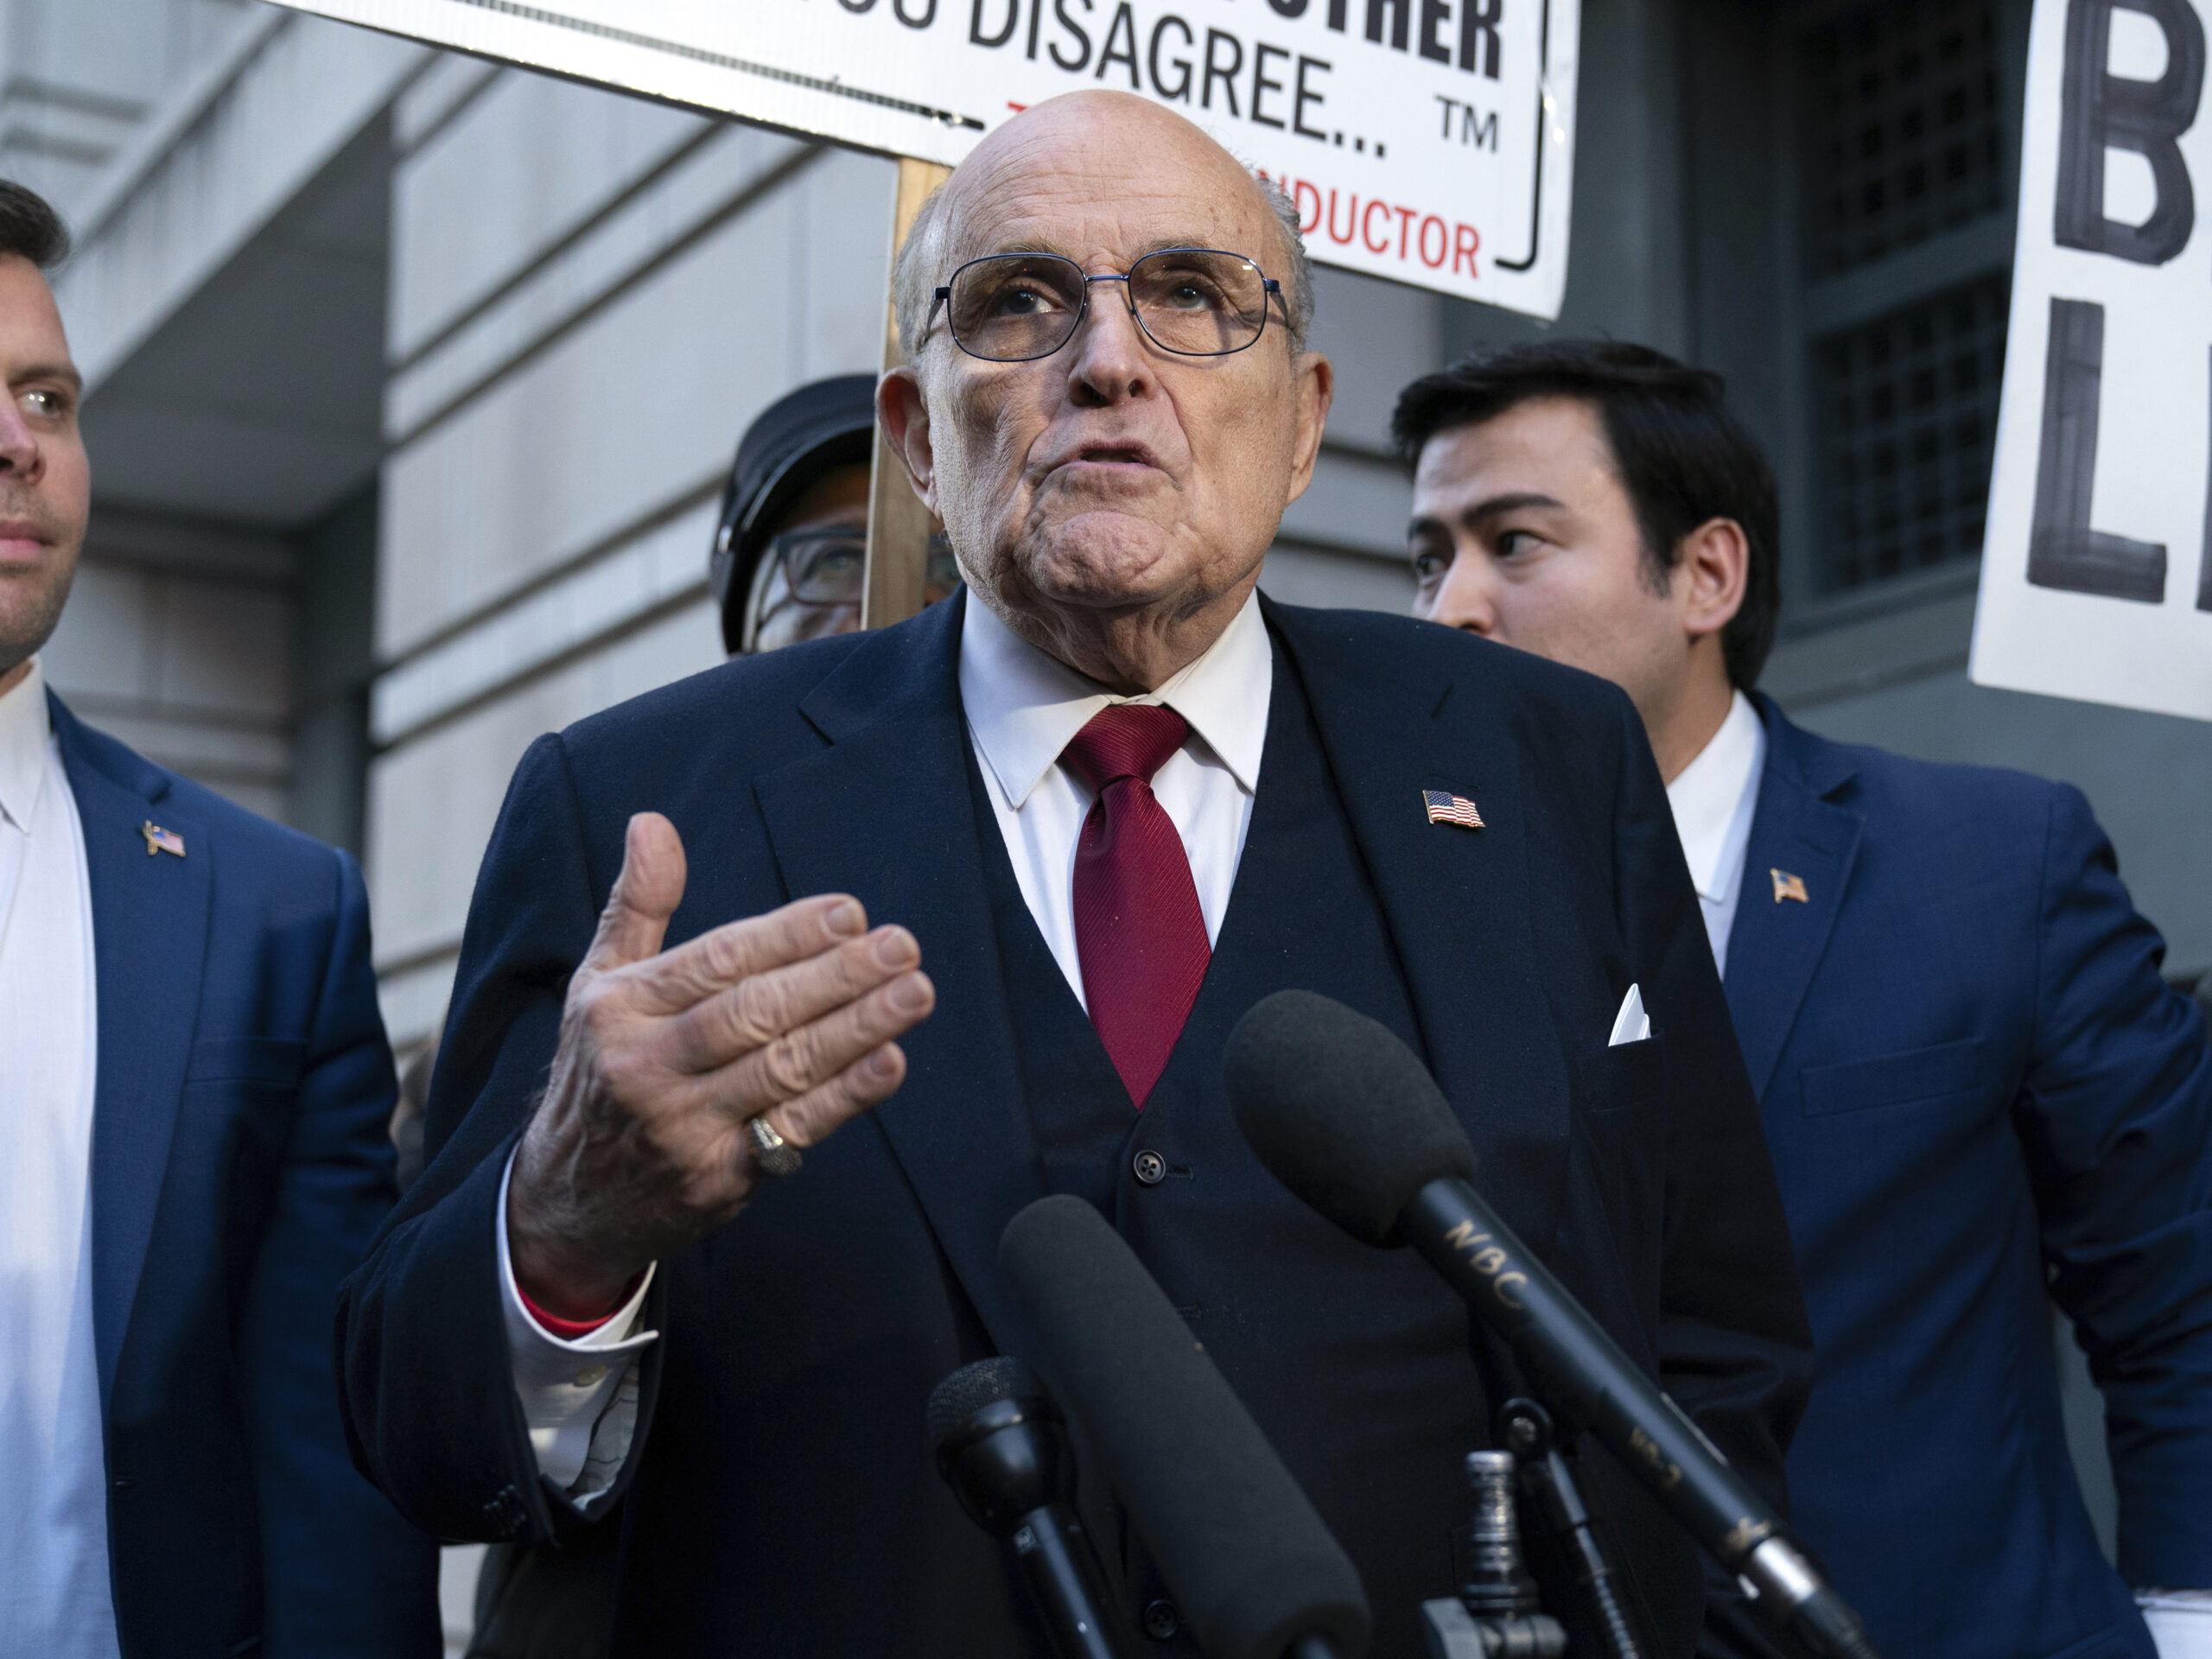 Rudy Giuliani speaks during a news conference after his defamation trial